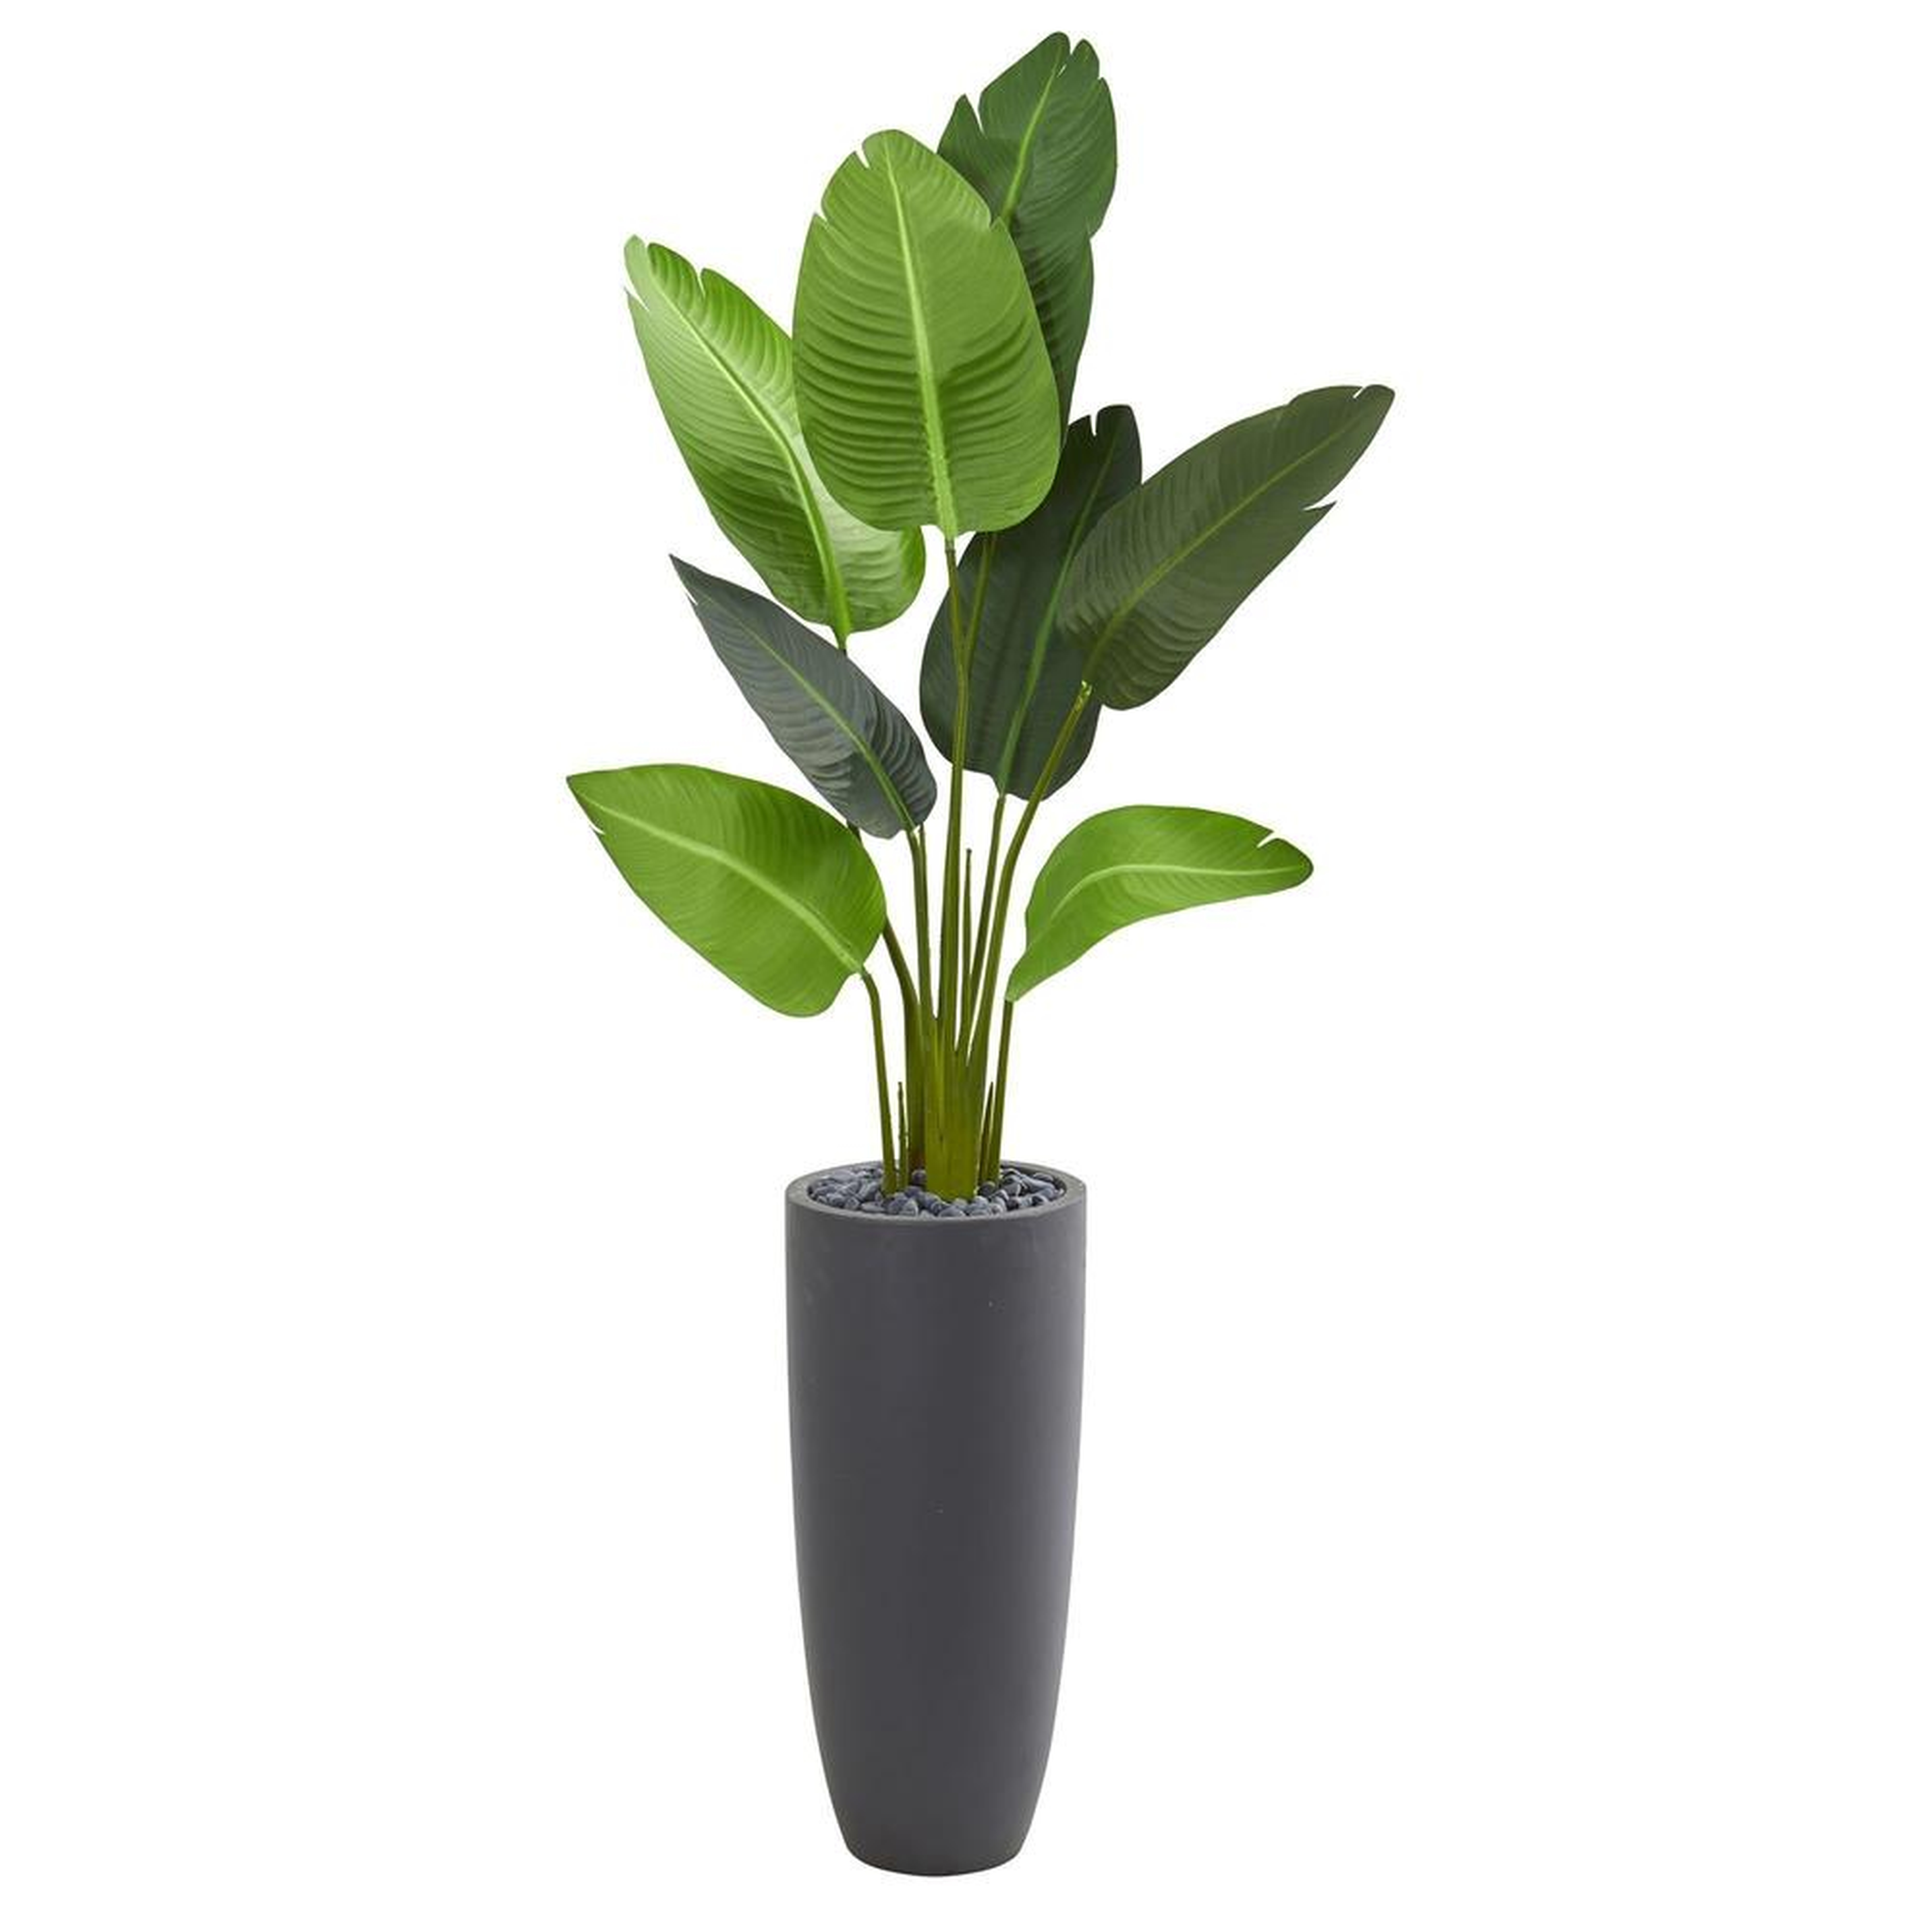 Indoor 5.5 ft. Traveler's Palm Artificial Tree in Gray Planter - Fiddle + Bloom